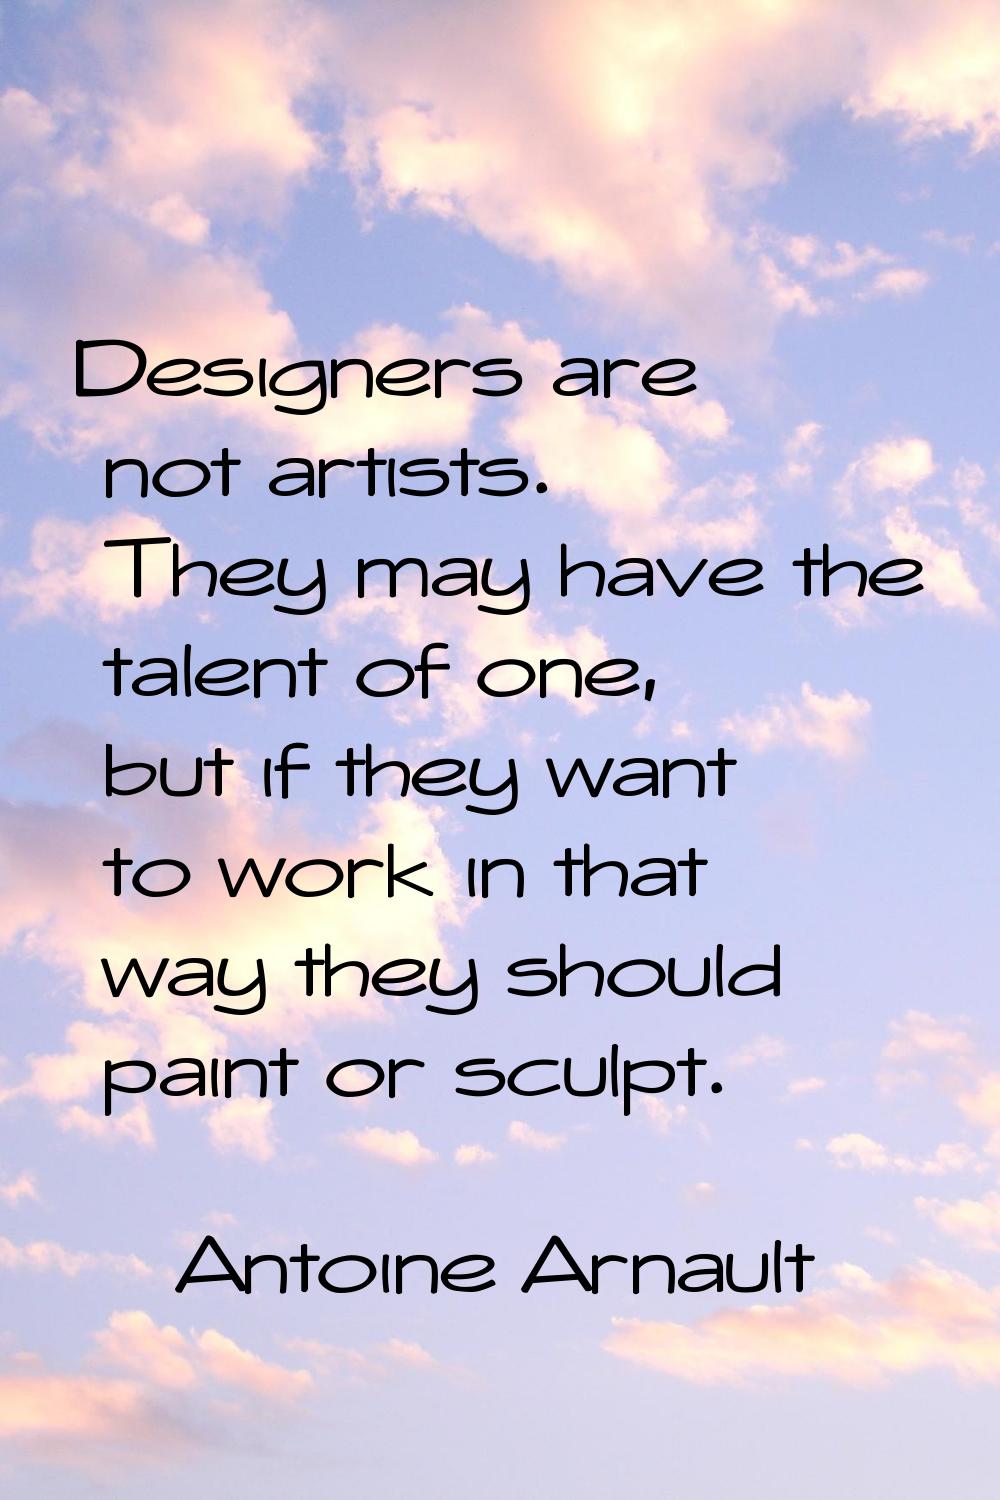 Designers are not artists. They may have the talent of one, but if they want to work in that way th